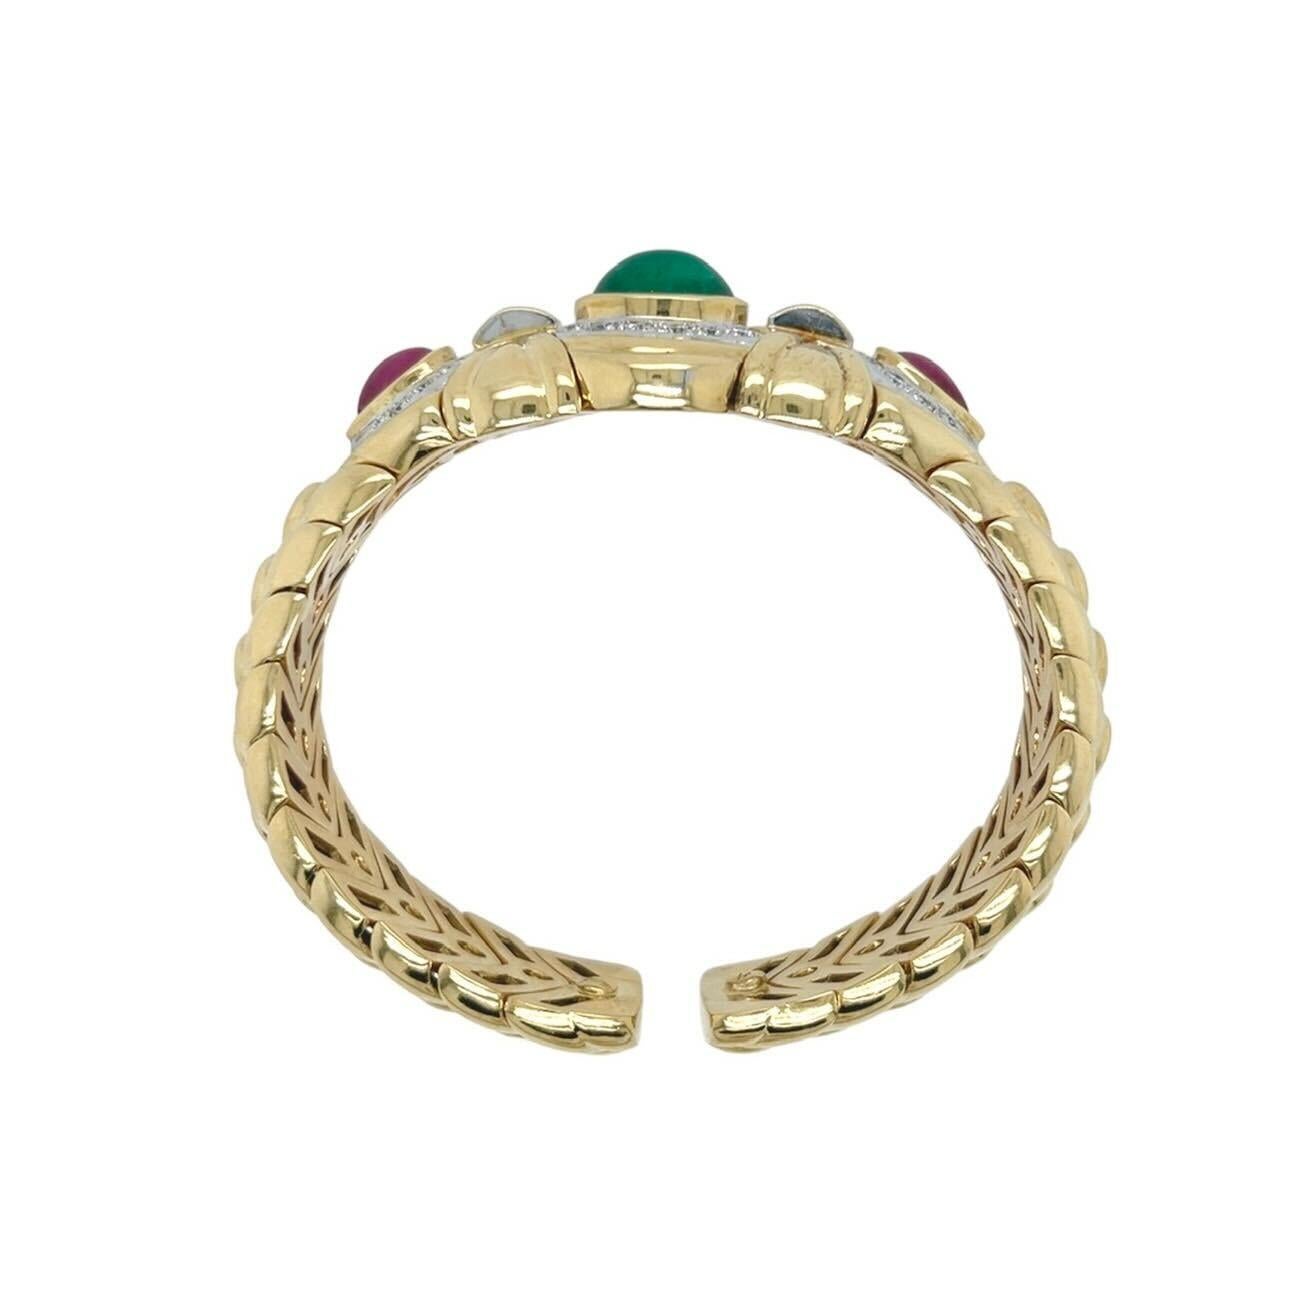 An 18 karat yellow gold, emerald, ruby and diamond bracelet.  Fashioned as an open backed flexible cuff of stylized braid design centering a bezel set oval cabochon emerald measuring approximately 10.85 x 7.58 mm surrounded by twelve (12) round